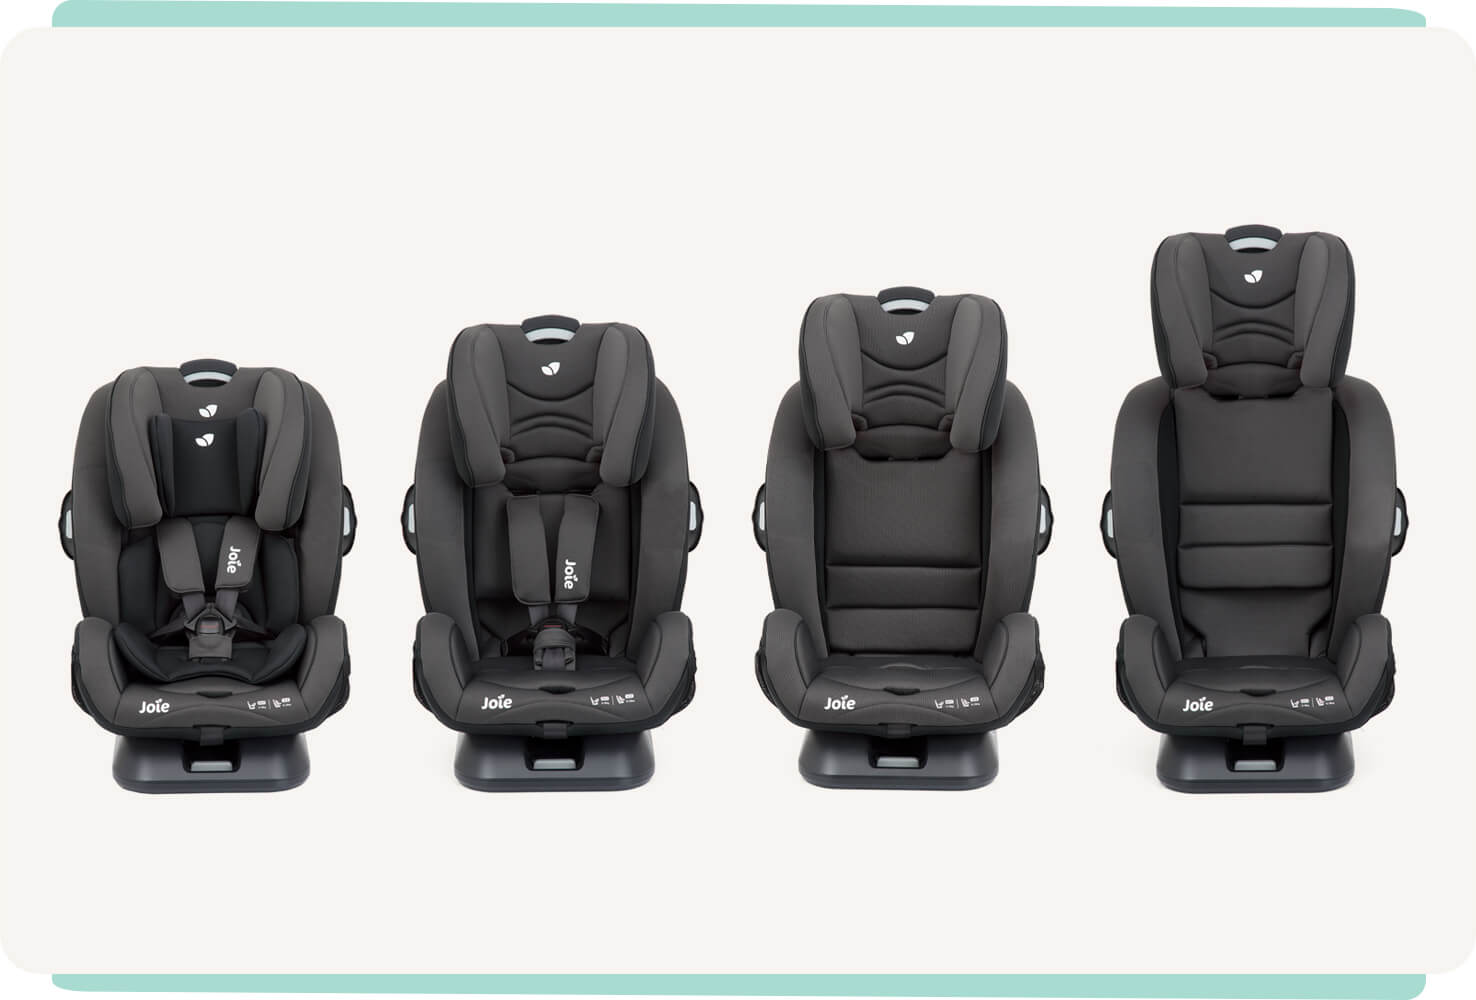  Four Joie verso booster car seats positioned next to each other, each displaying a different headrest position.